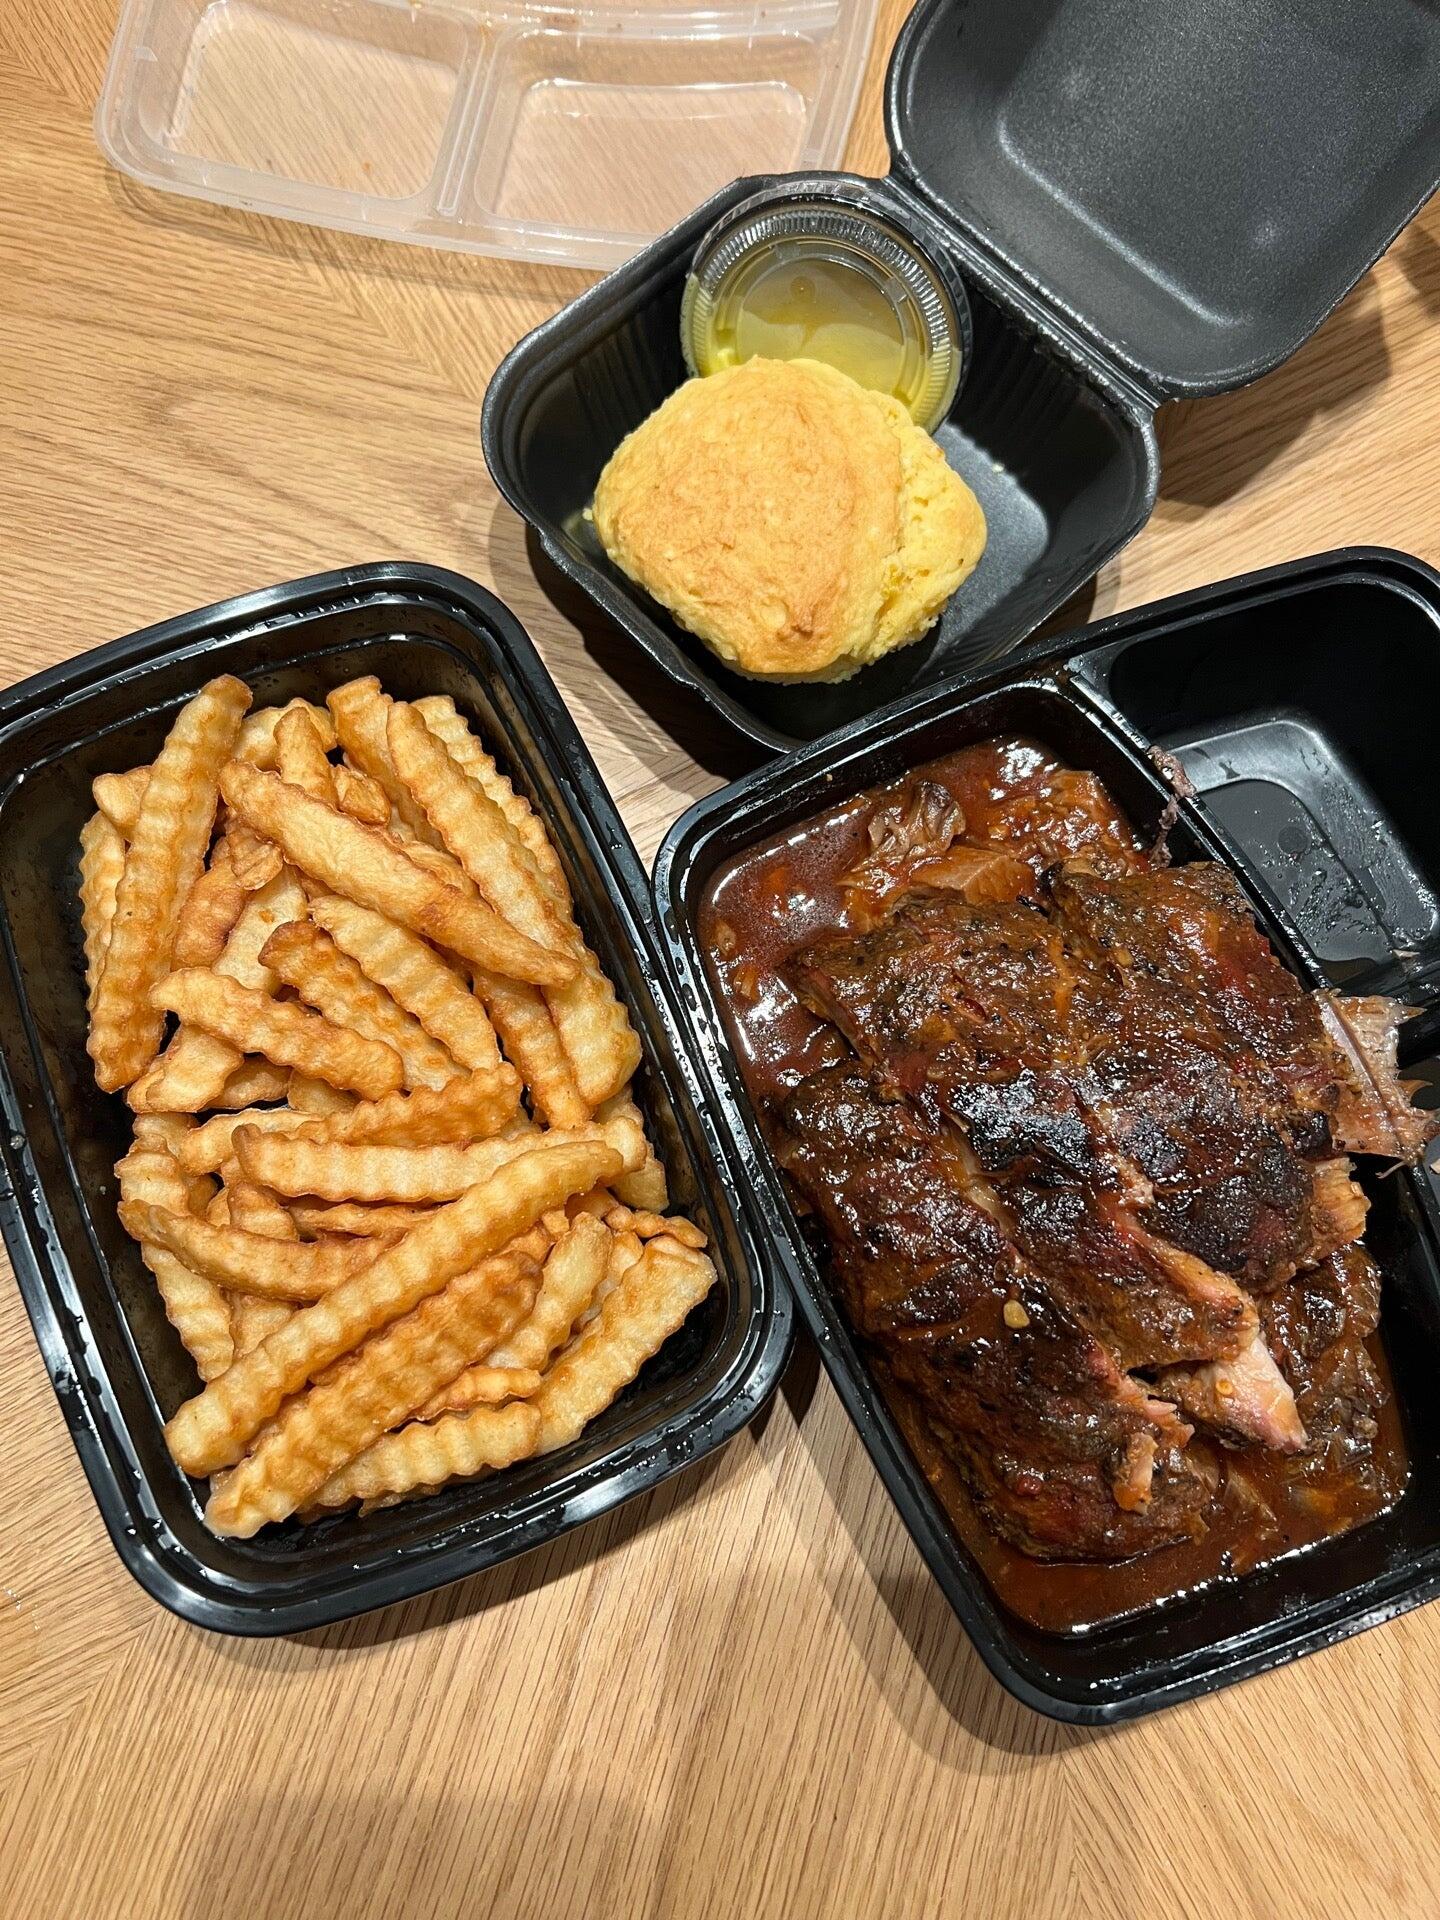 Britt's BBQ and Catering